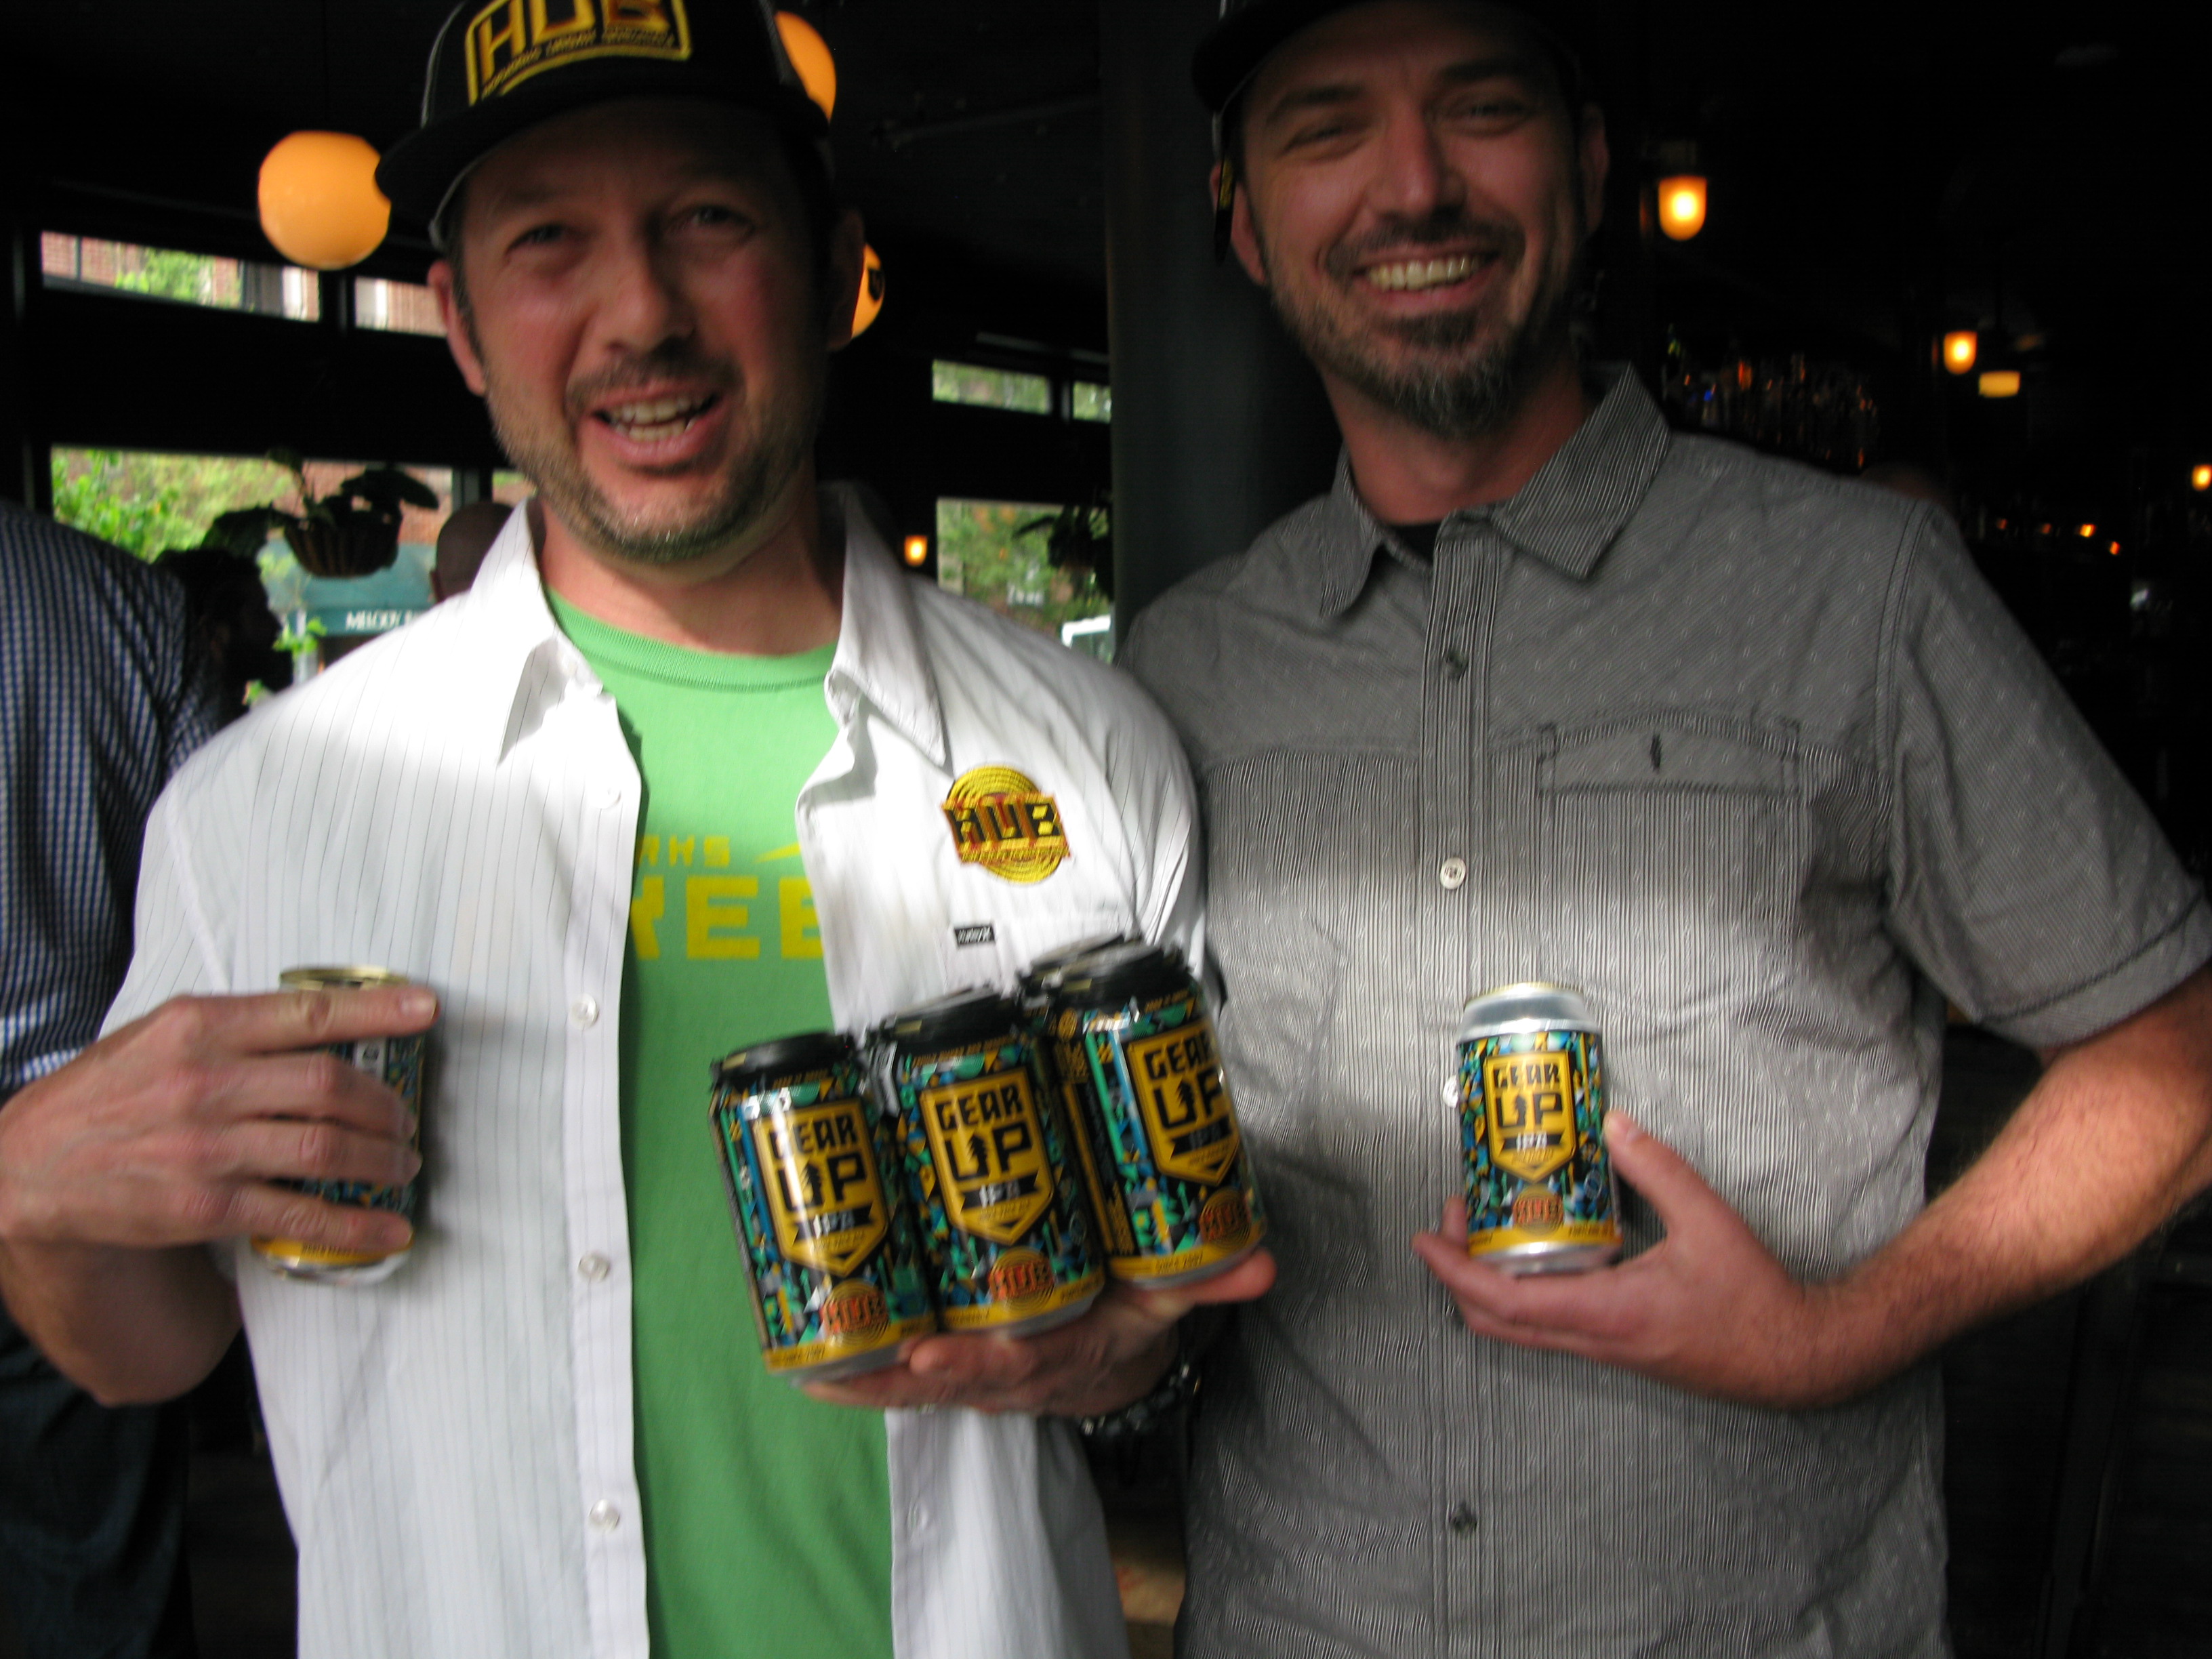 Head brewer Tom Bleigh (right) and founder Christian Ettinger show off the culmination of six months of work – Hopworks new Gear Up IPA, a Northwest-Style IPA with a dry and tropical-hop profile. The beer is also HUB’s first foray into the world of 12 oz. six-pack can. “Every element of Gear Up IPA is meant to point to the majestic Pacific Northwest region,” says marketing director Eric Steen. “The beer is brewed with organic malted barley from Oregon, naturally filtered water from the Bull Run Watershed, and local hops. The label, designed by Jolby & Friends, portrays abstract landscapes of the Pacific Northwest sprinkled with images of the gear used for exploring the natural world.” Look for it on grocers' shelves now.